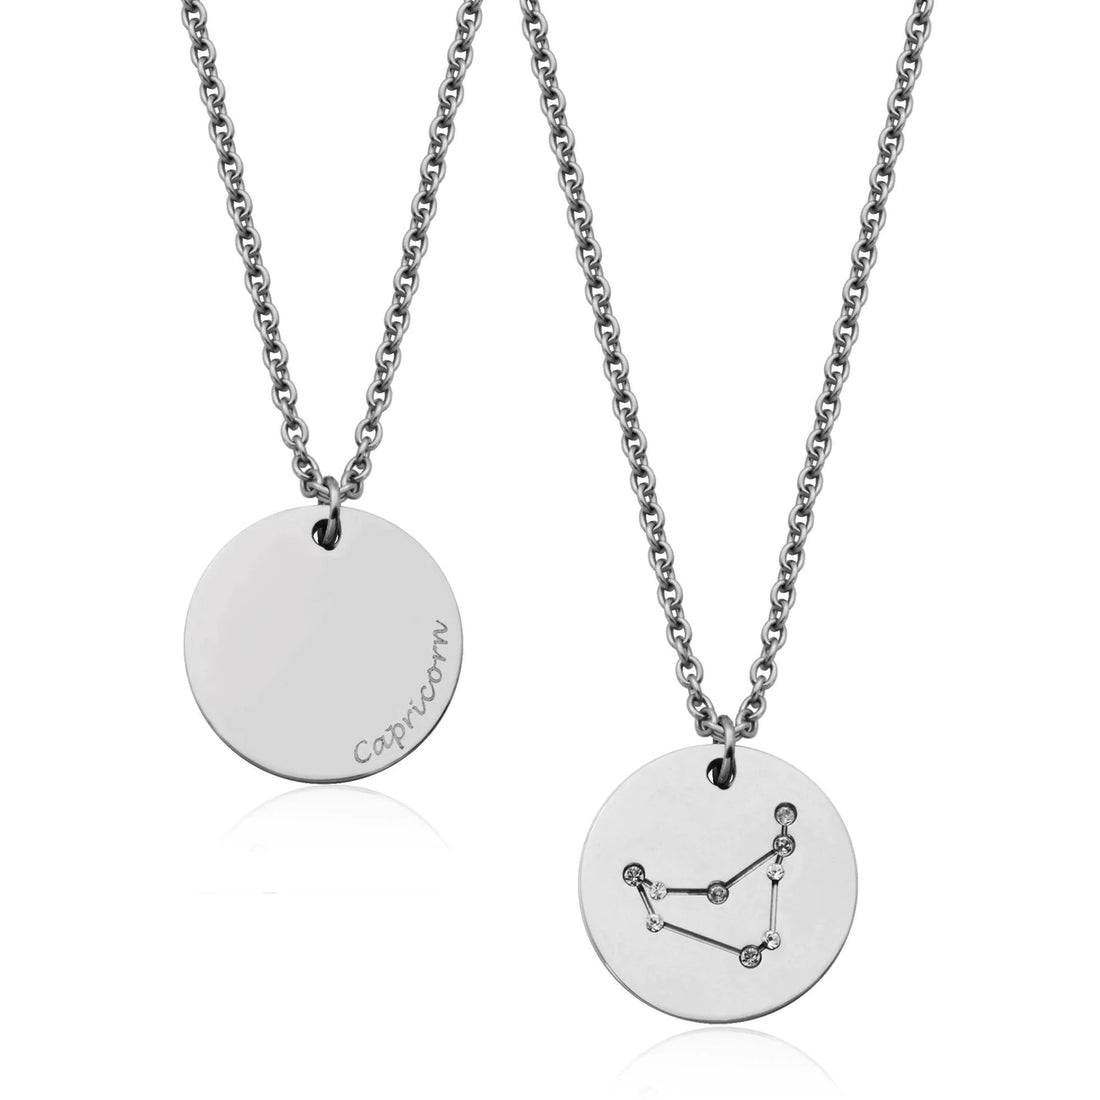 Stainless Steel Constellation Necklace